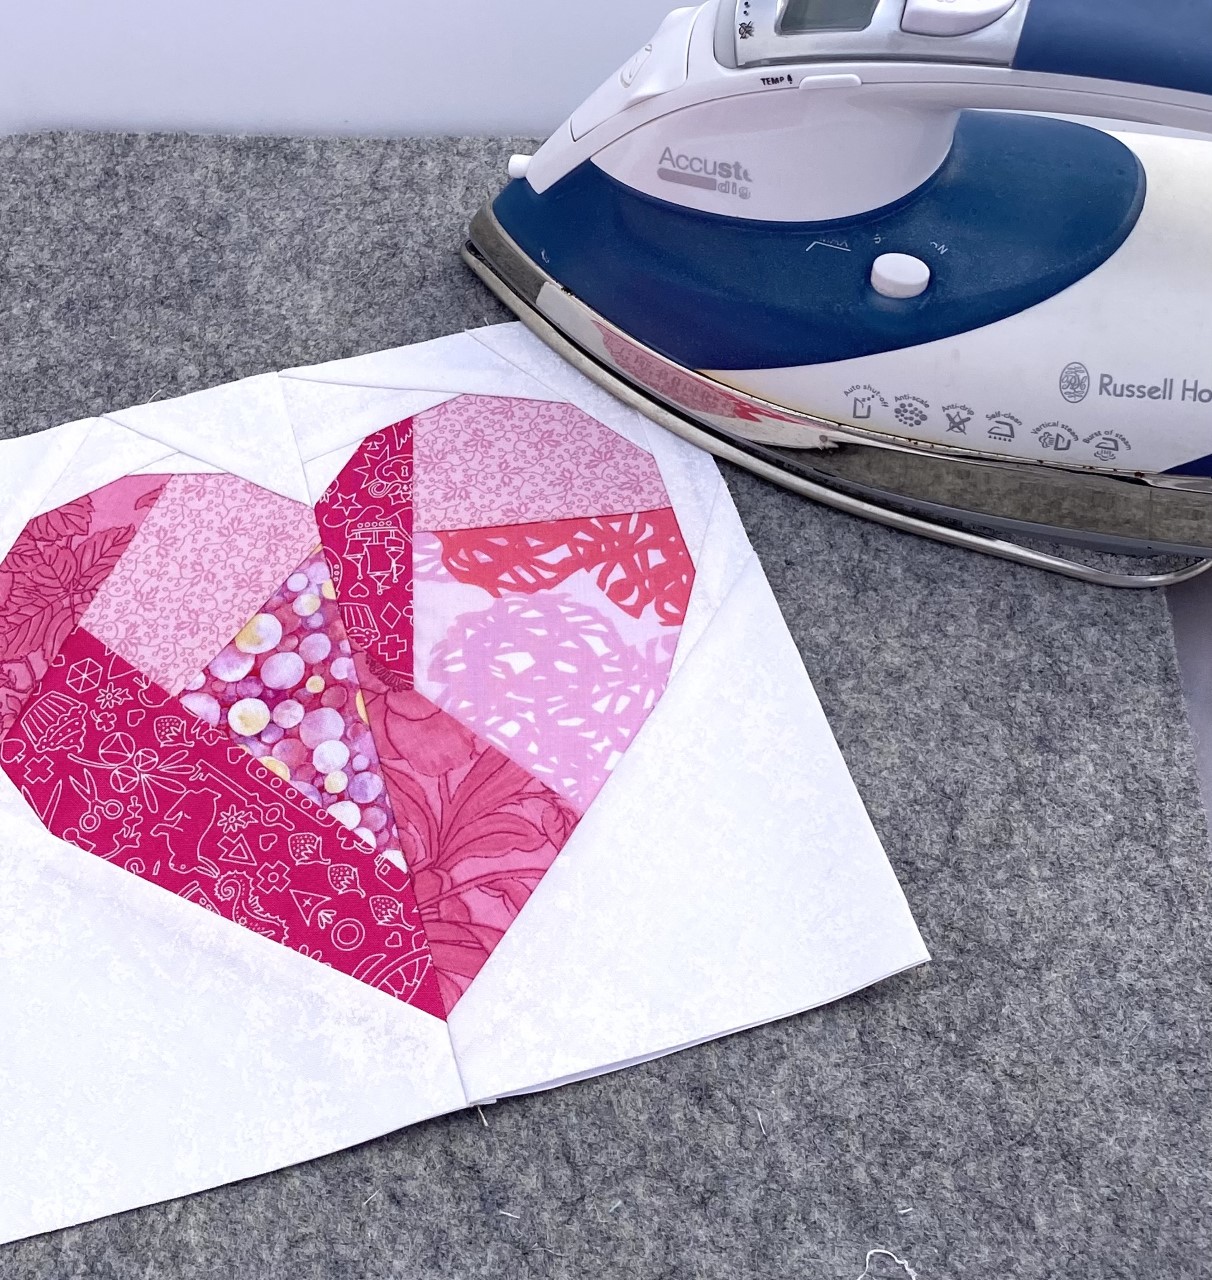 Pressing a paper pieced heart quilt block. Paper pieced geometric heart quilt block being pressed on a wool pressing mat by a Russell Hobbs Iron.